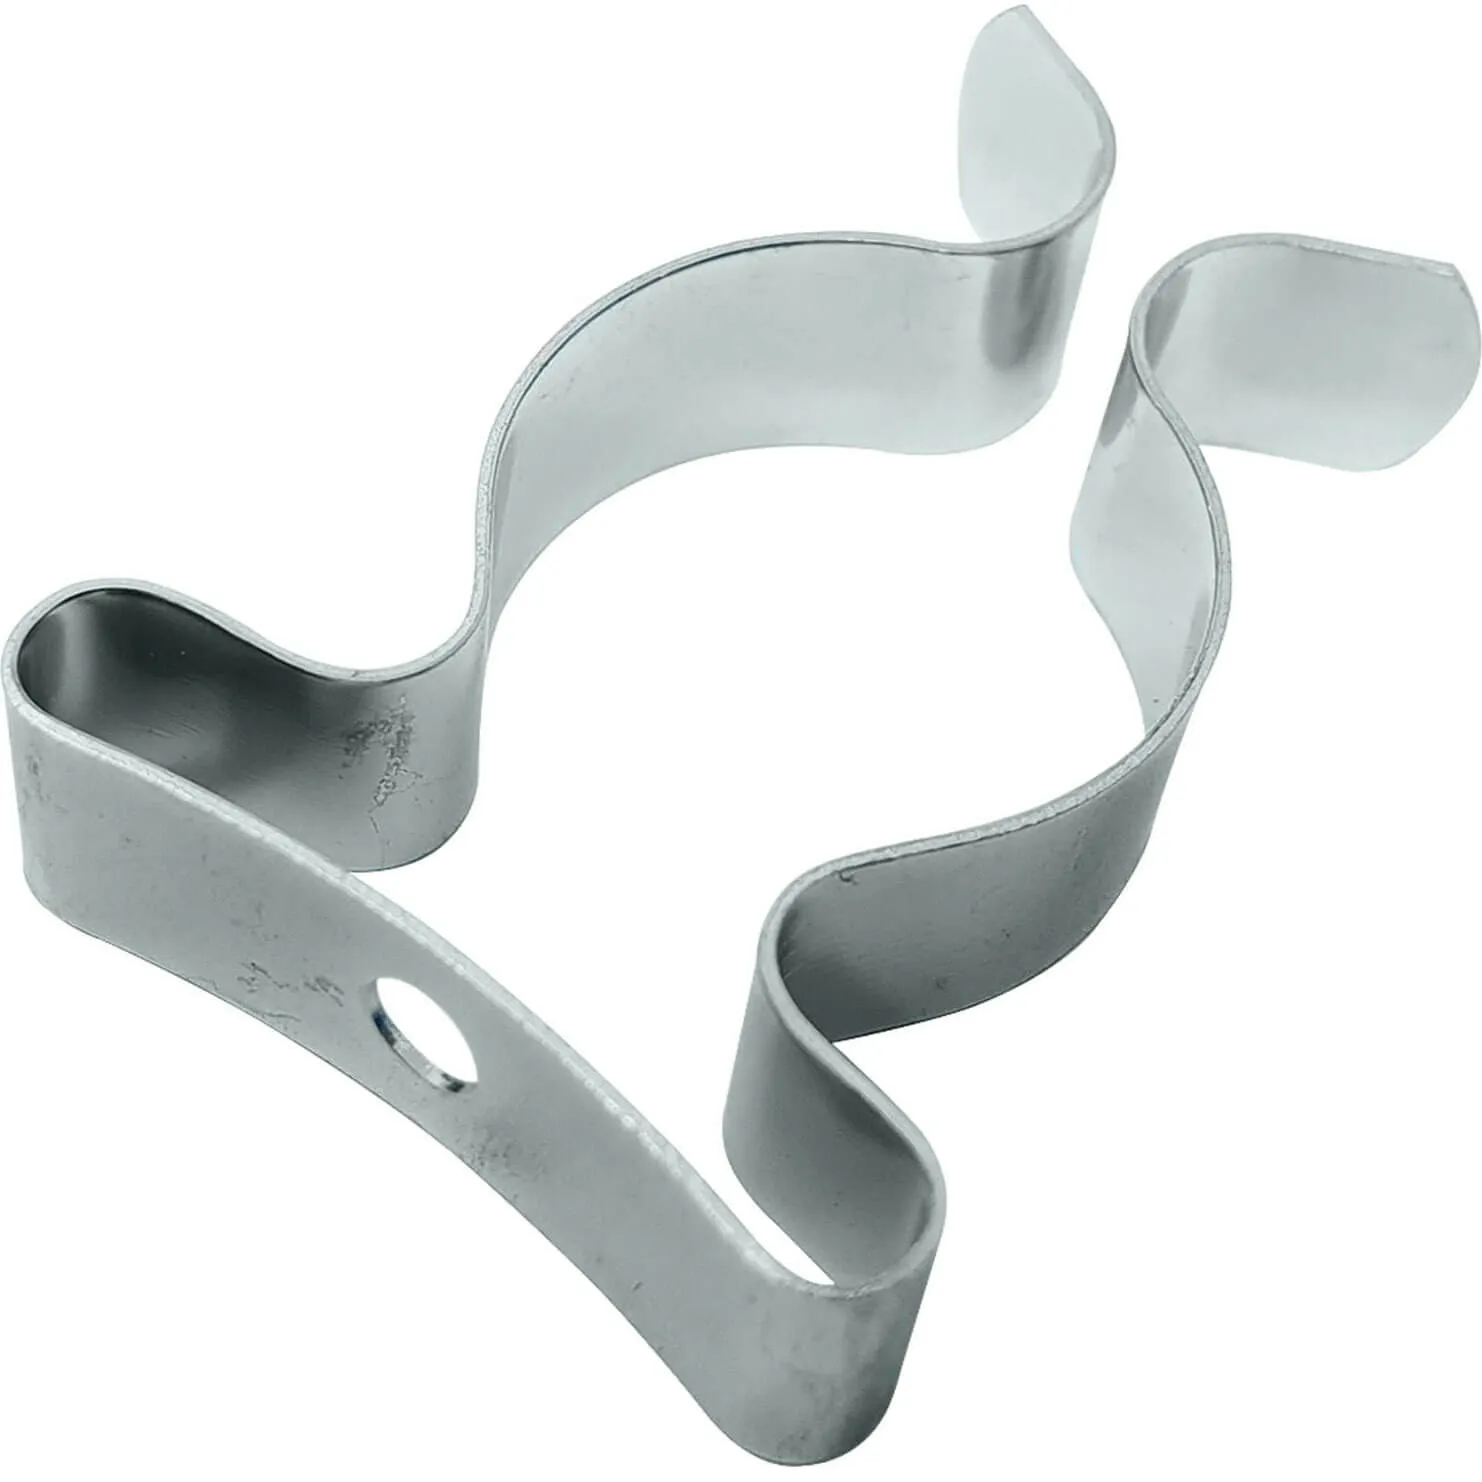 Forgefix Zinc Plated Tool Clips - 19mm, Pack of 25